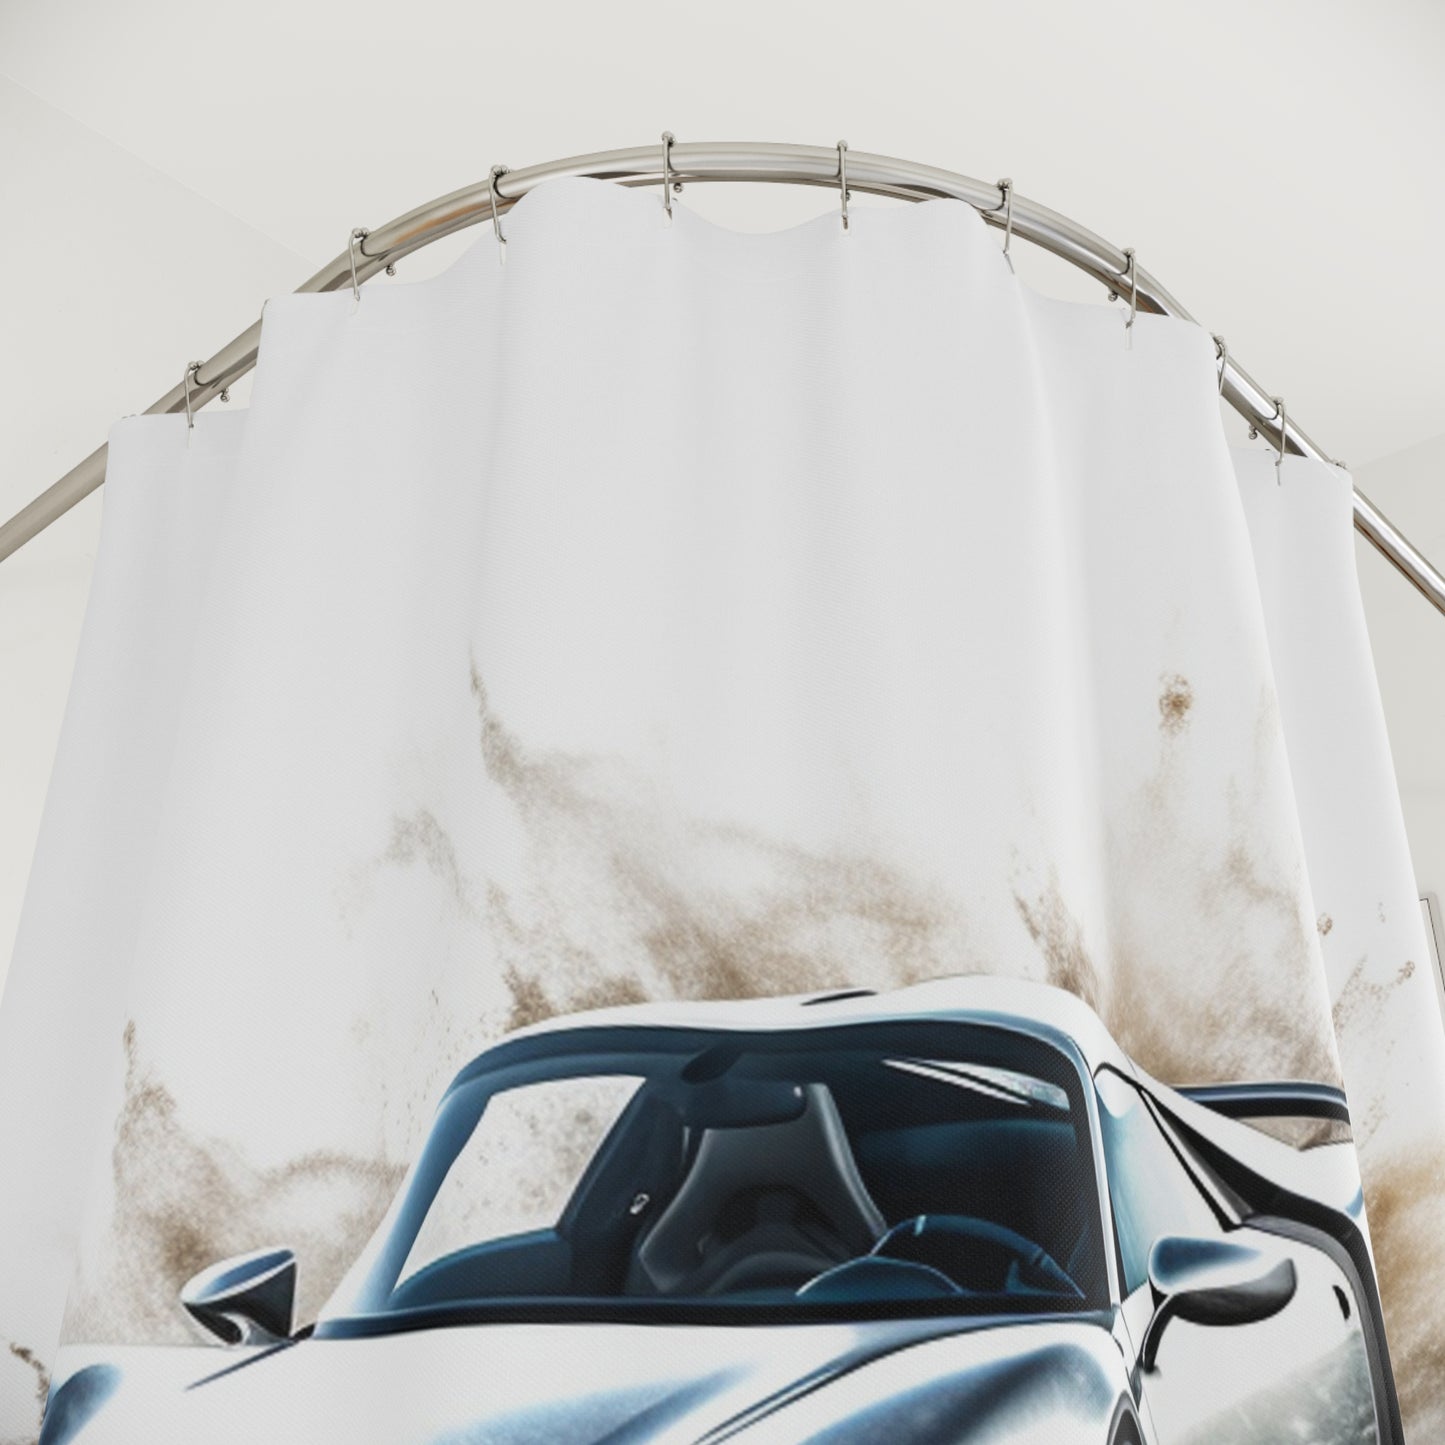 Polyester Shower Curtain 918 Spyder white background driving fast with water splashing 2